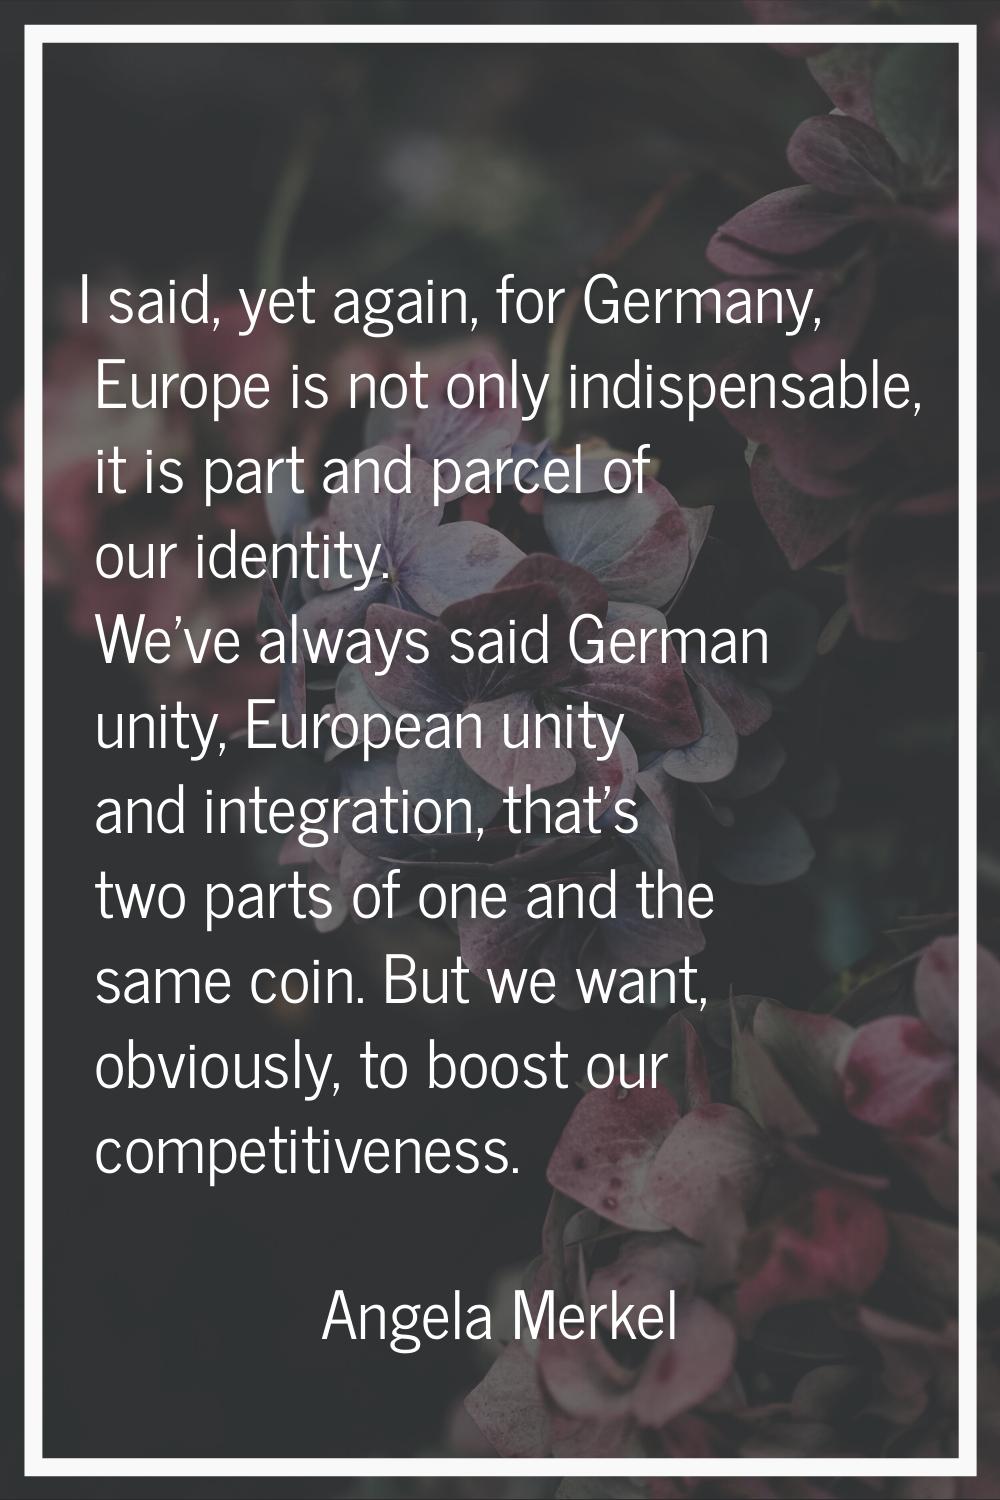 I said, yet again, for Germany, Europe is not only indispensable, it is part and parcel of our iden